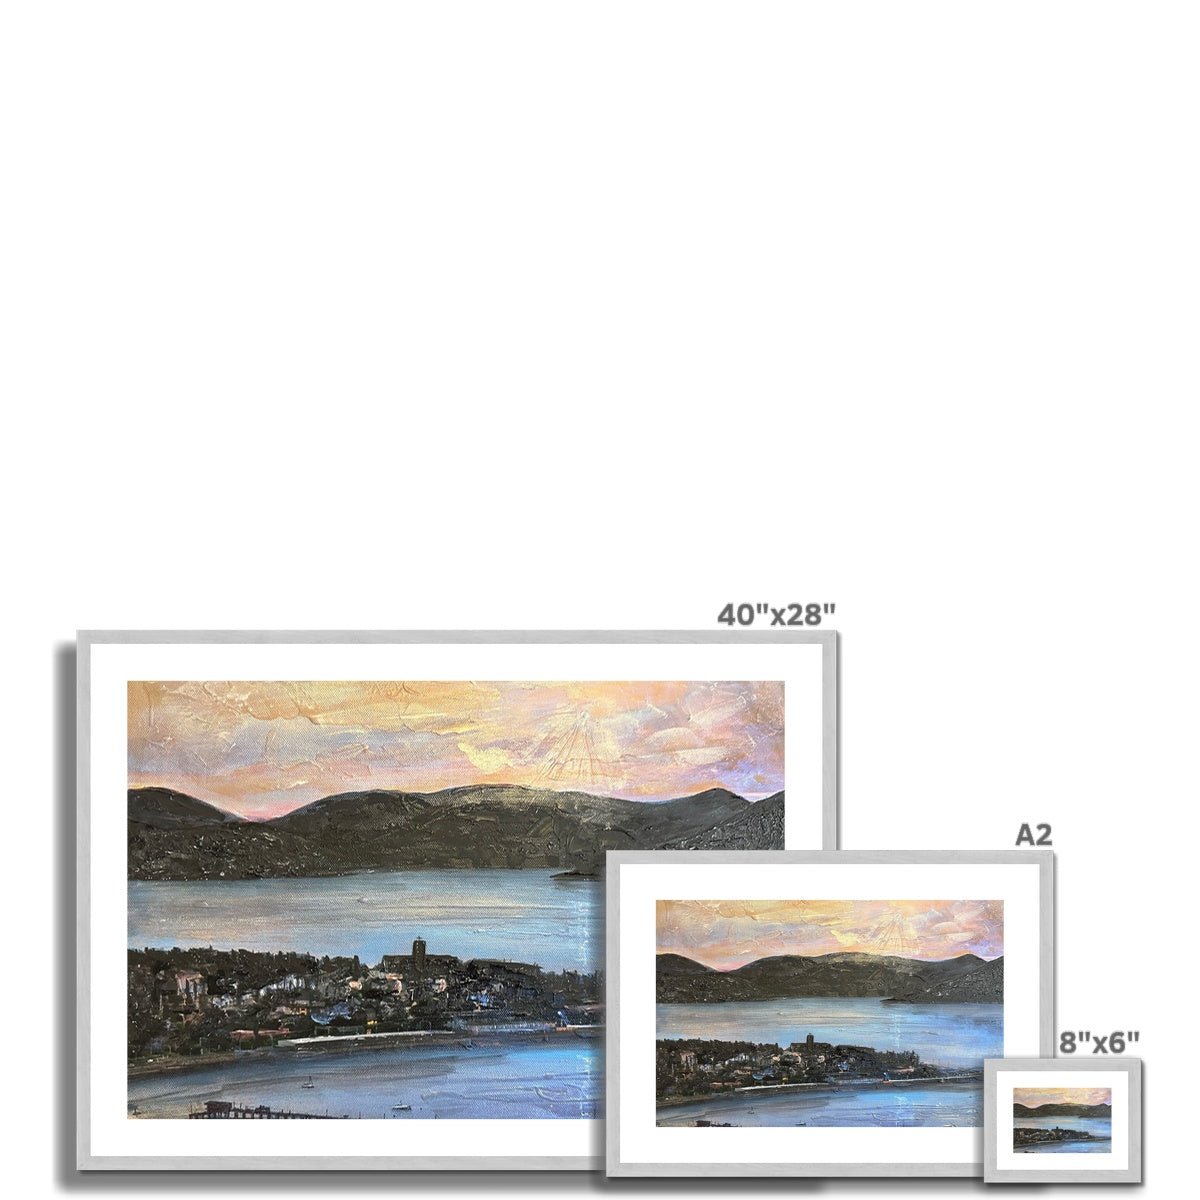 From Lyle Hill Painting | Antique Framed & Mounted Prints From Scotland-Antique Framed & Mounted Prints-River Clyde Art Gallery-Paintings, Prints, Homeware, Art Gifts From Scotland By Scottish Artist Kevin Hunter